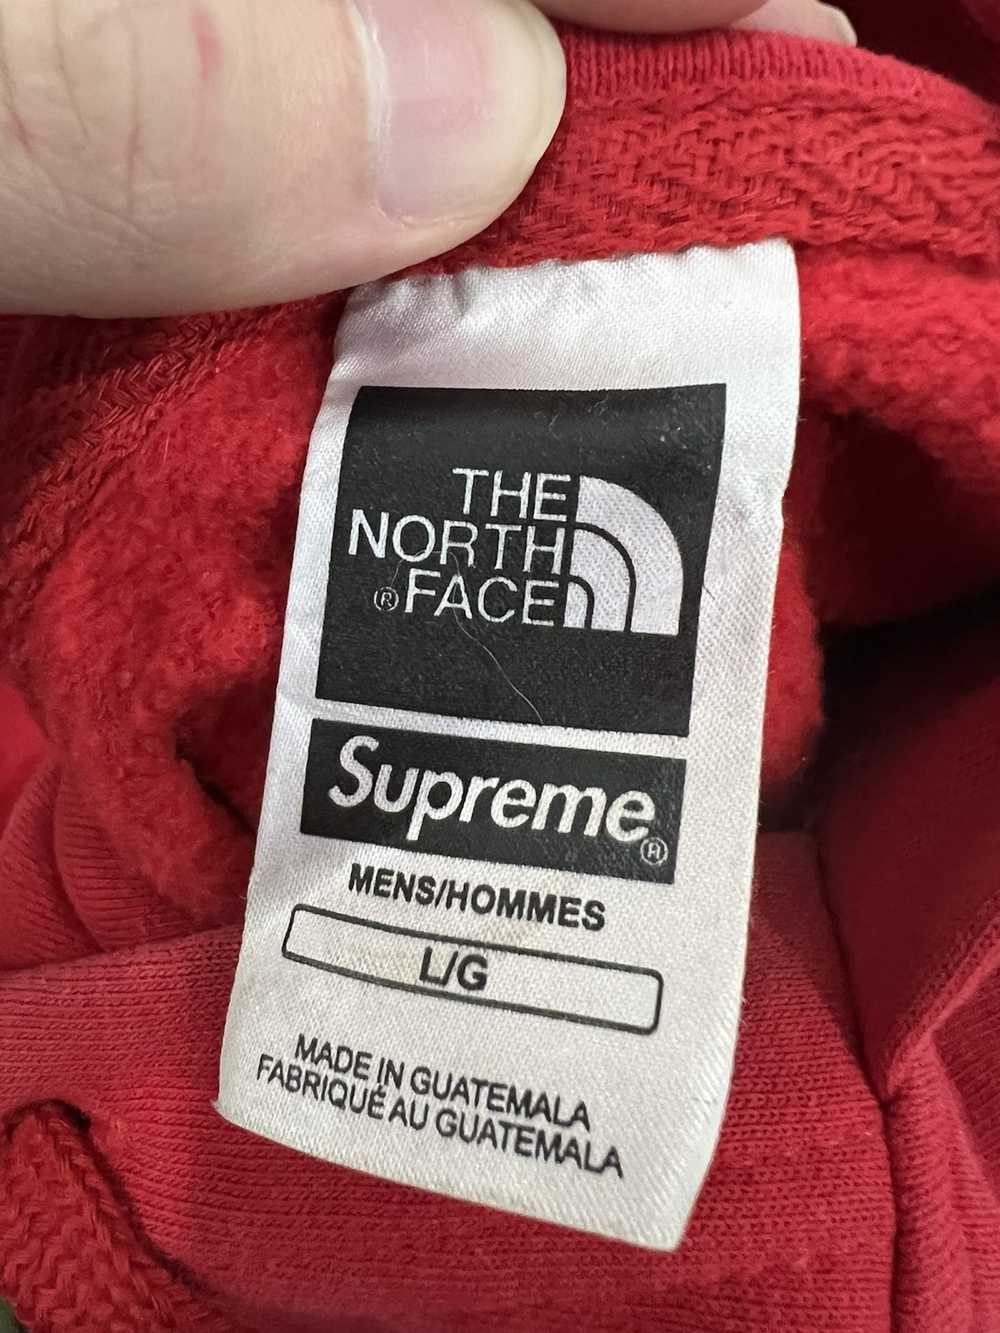 Supreme × The North Face Photo Hooded Sweatshirt - image 4